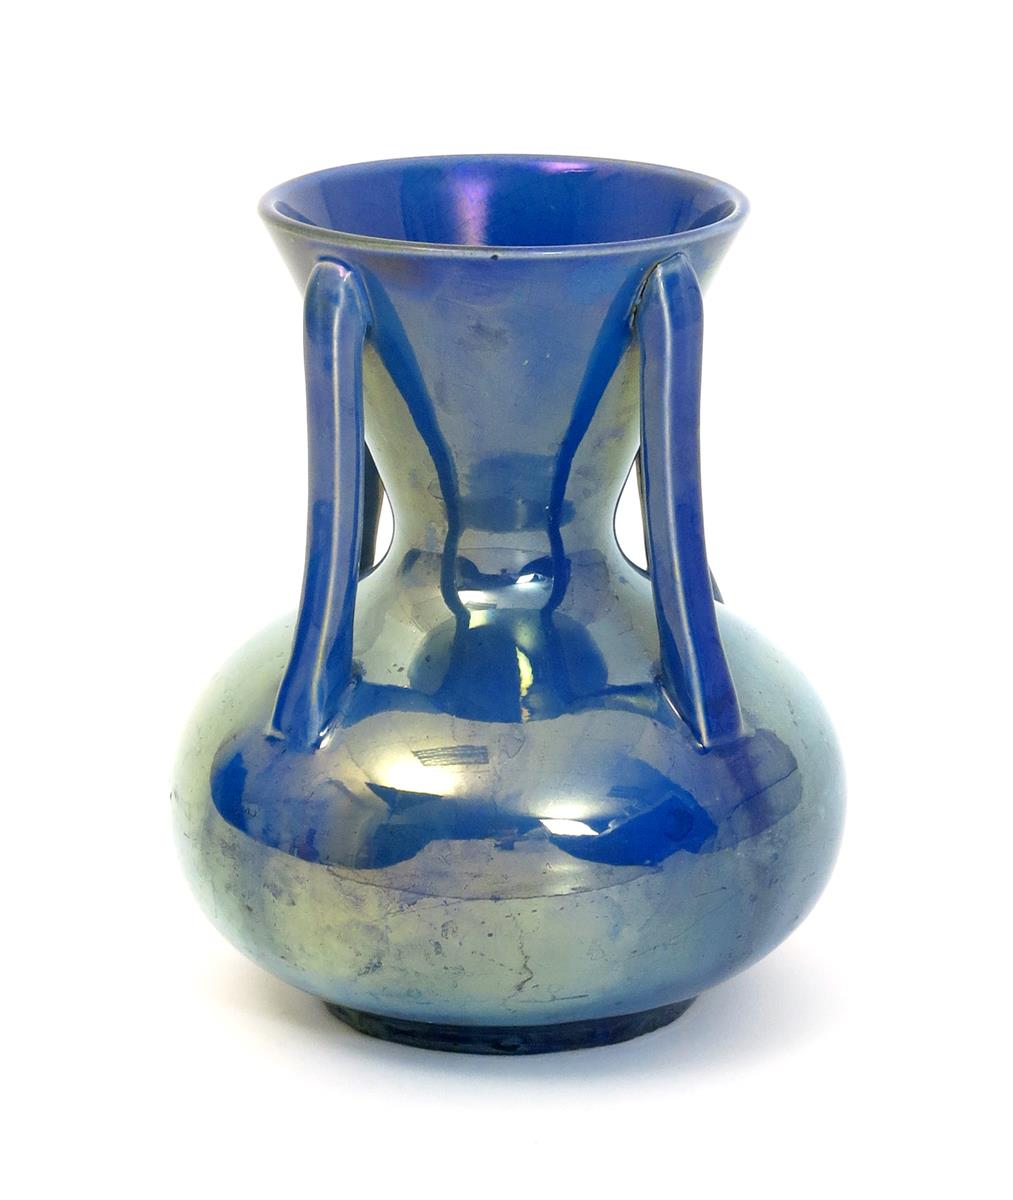 A rare Carter's Poole Pottery lustre vase probably designed by Owen Carter, ovoid with flaring